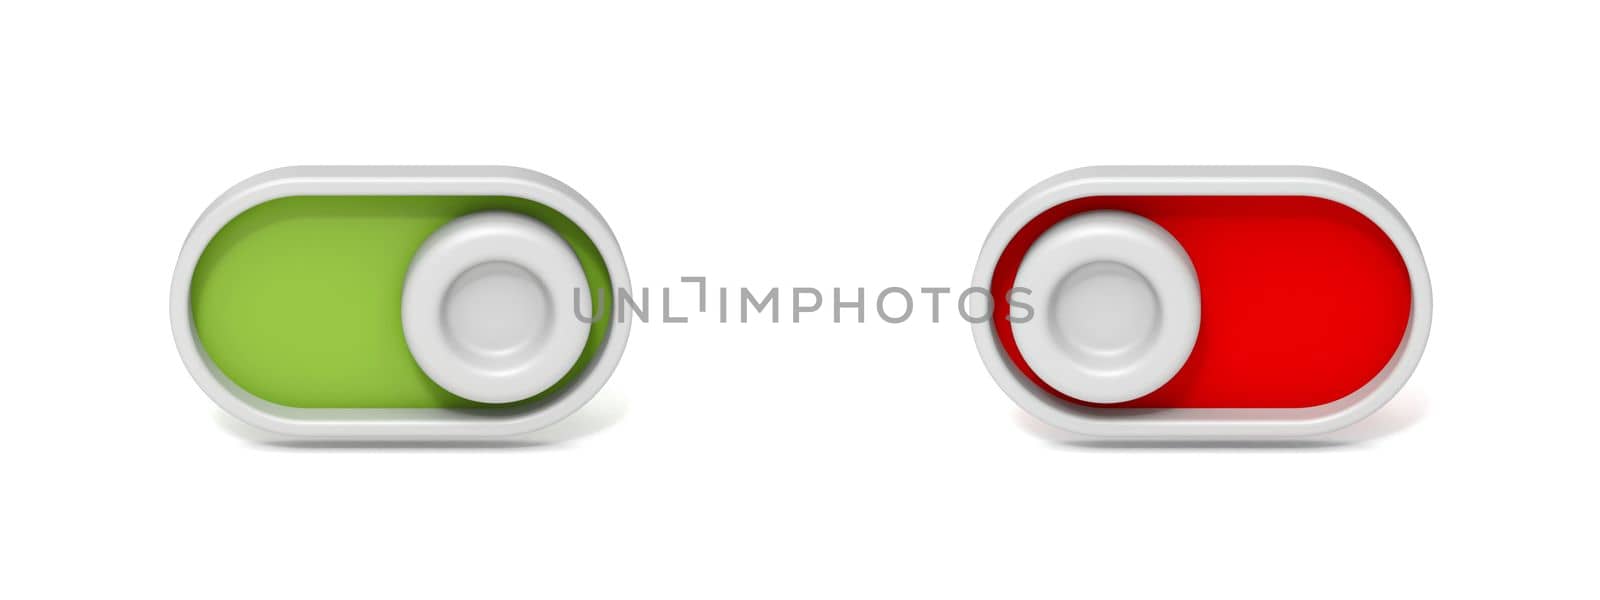 Green and red buttons 3D rendering illustration isolated on white background